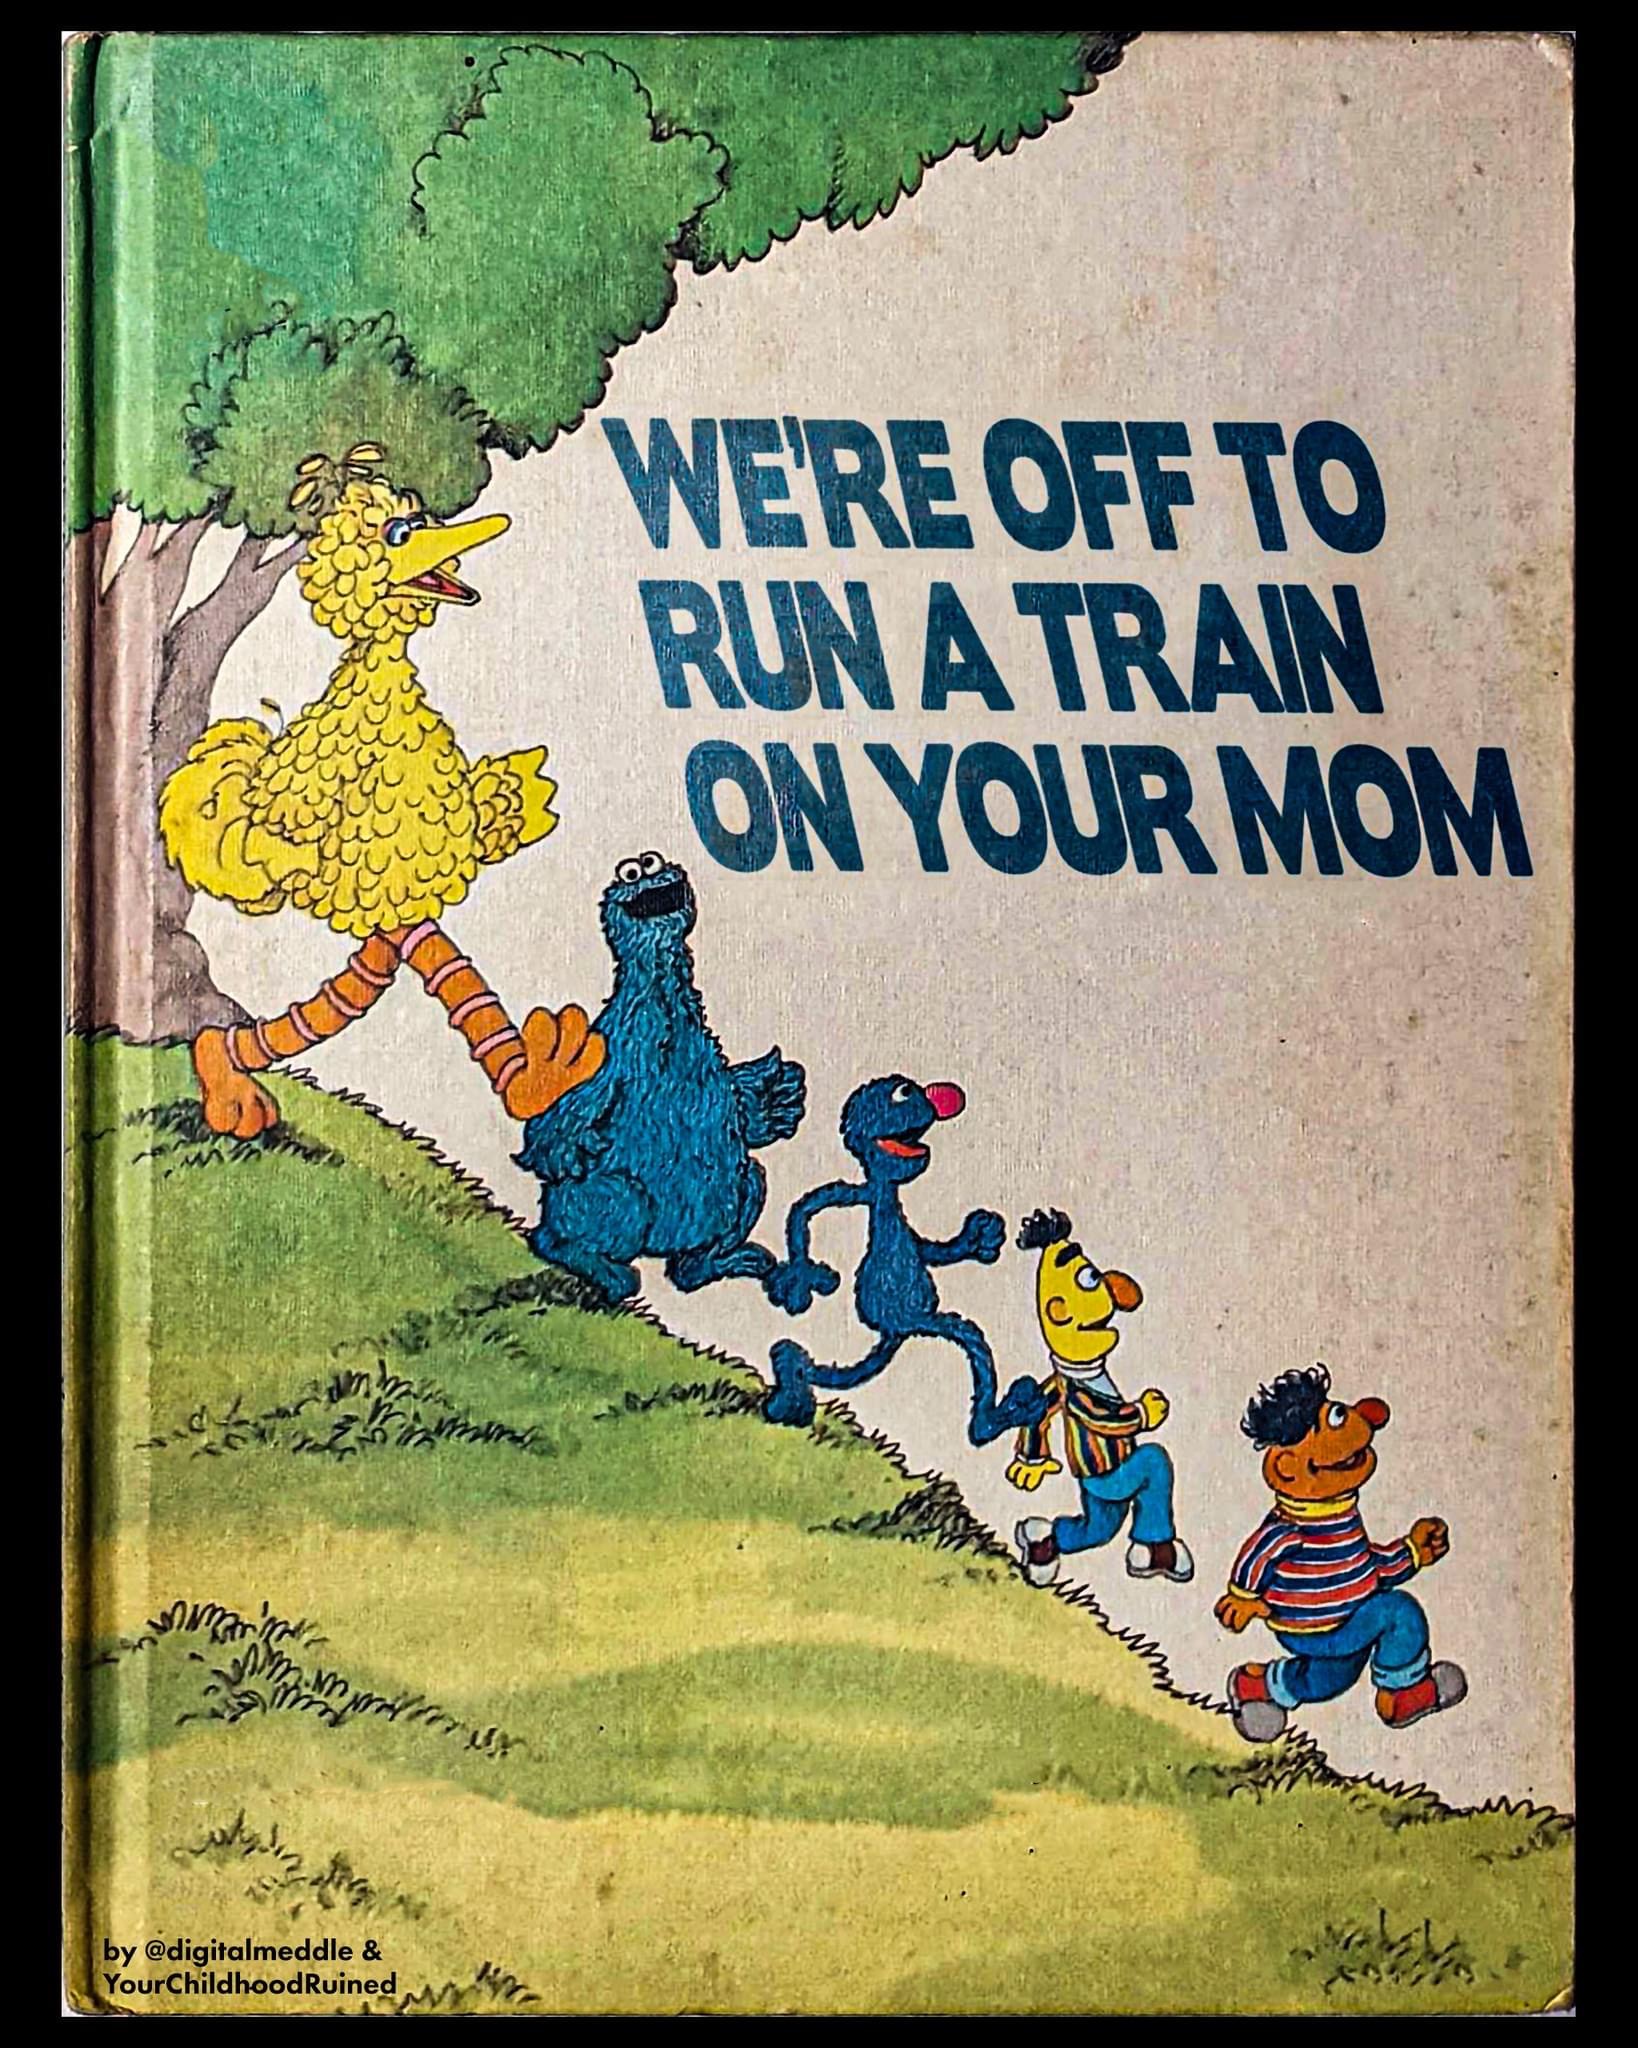 We’re off to run a train on your mom Blank Meme Template